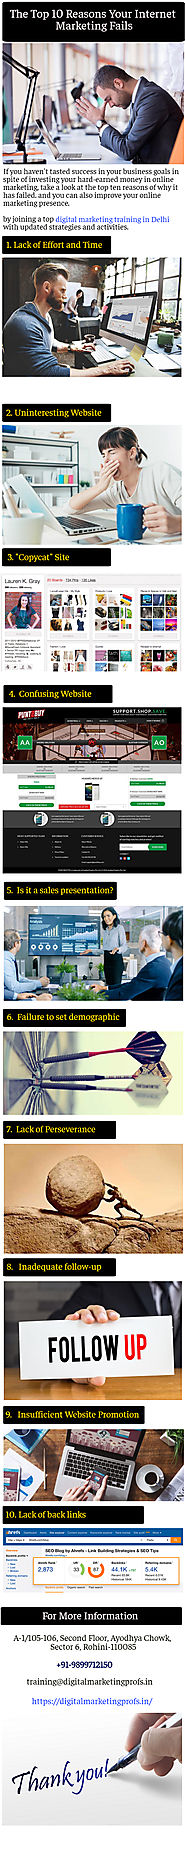 The Top 10 Reasons Your Internet Marketing Fails Infographic Template